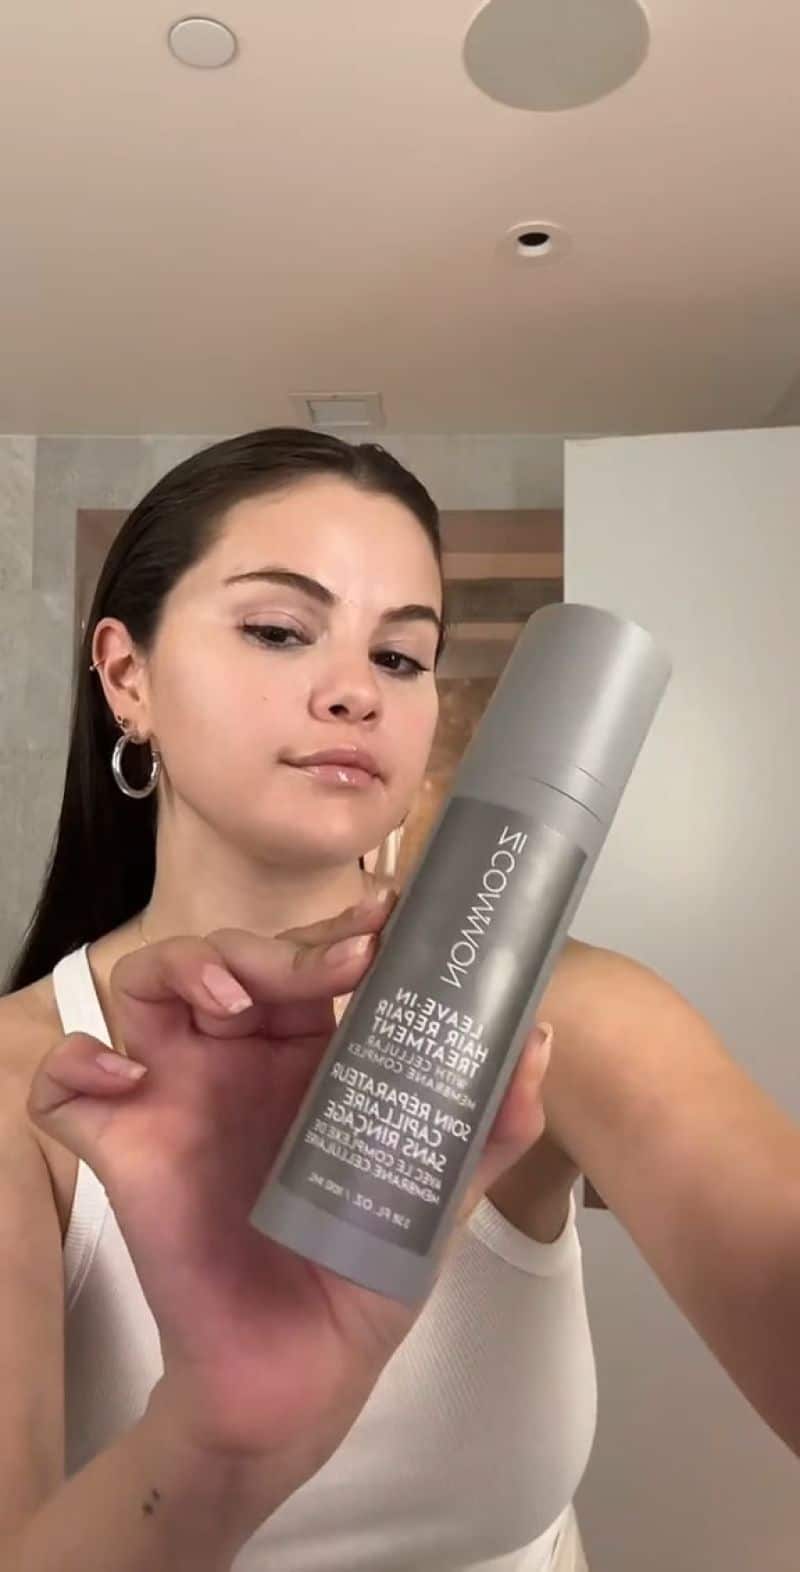 Selena Gomez Prepares for the Golden Globes with “Rare Beauty” Products